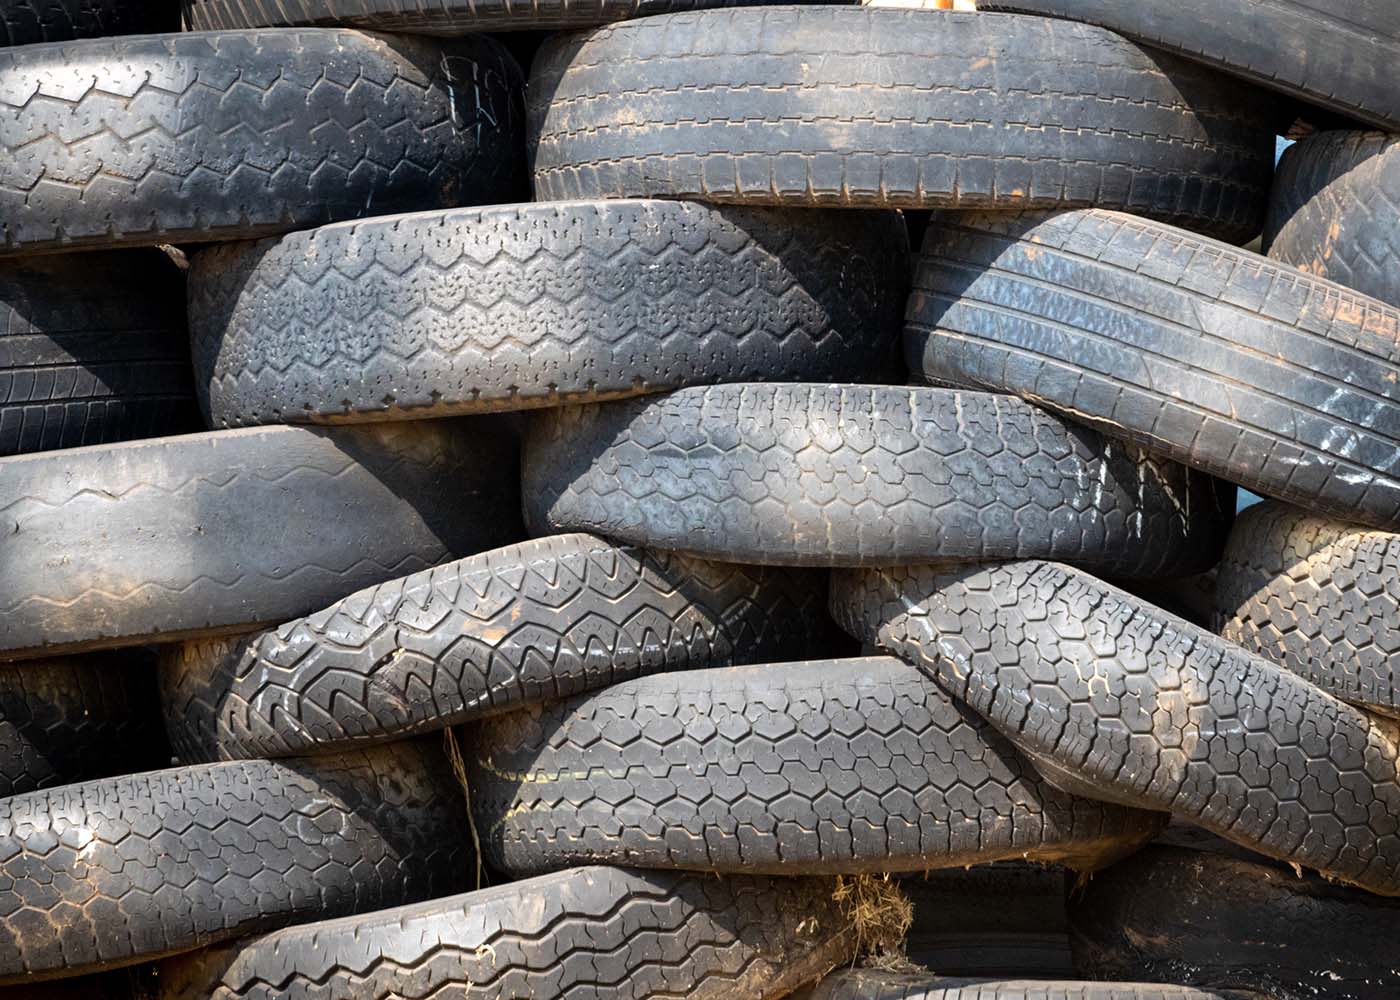 Image of a stack of tires in a landfill